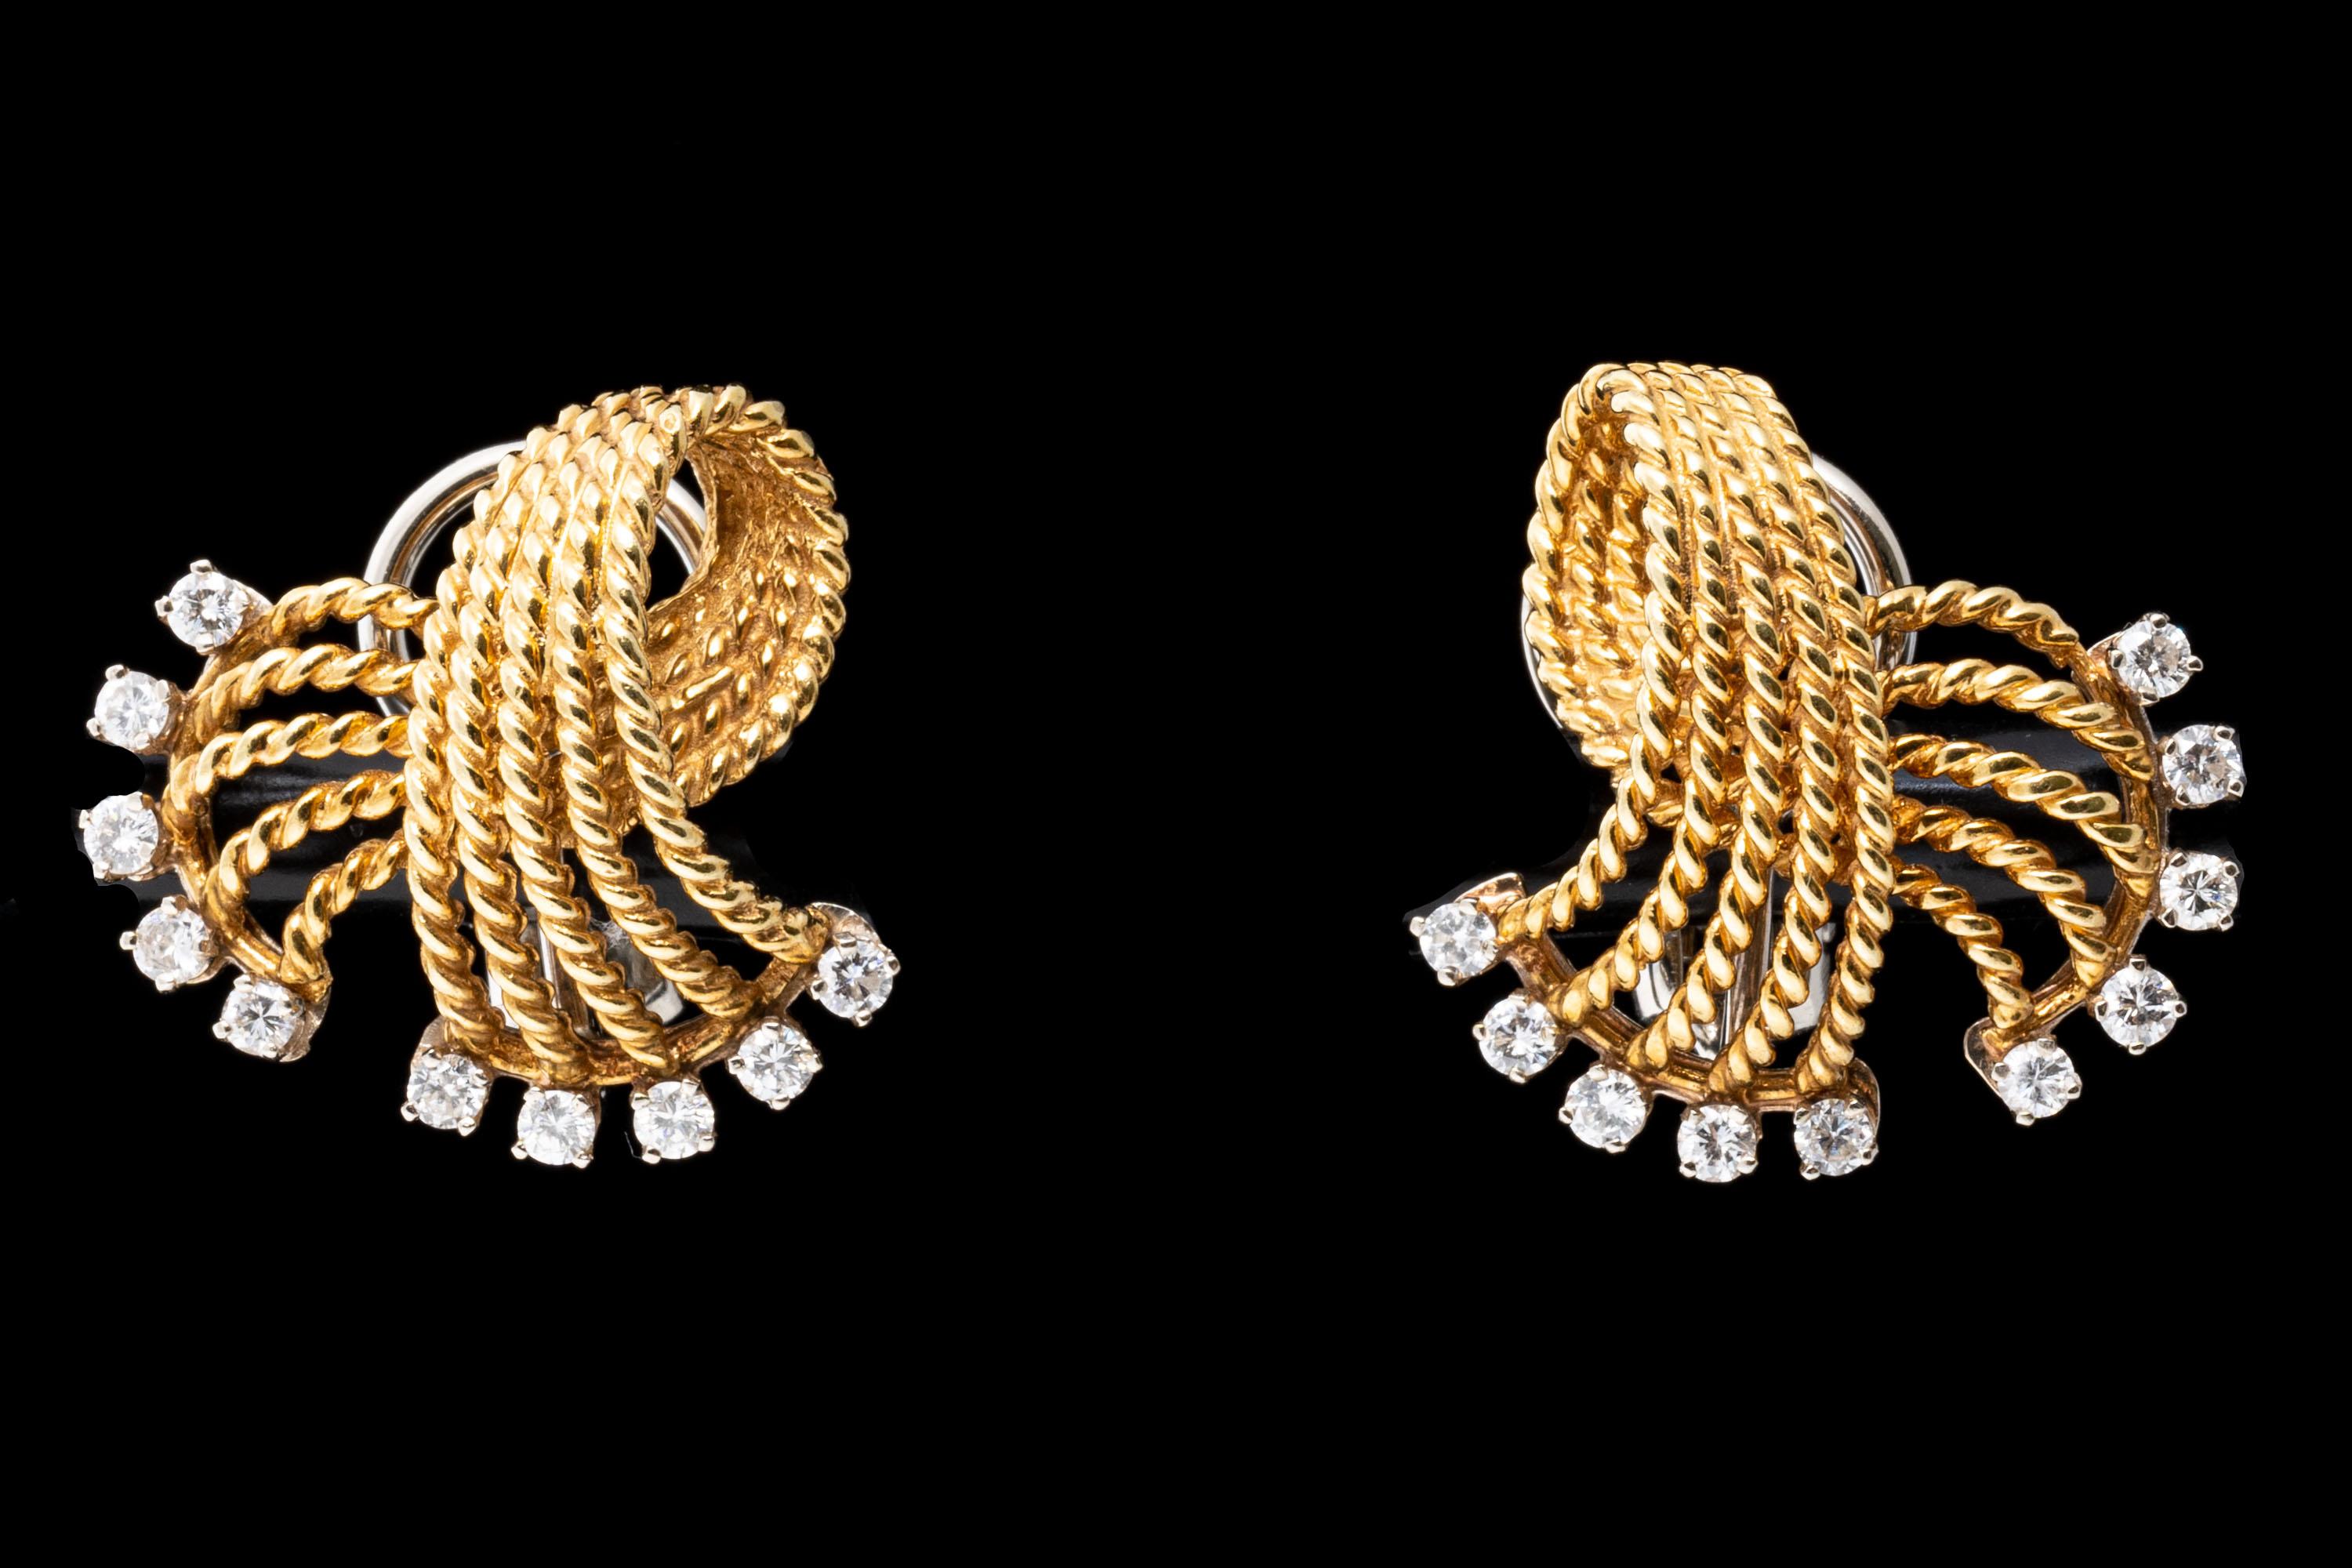 Yellow gold earrings. These classic earrings are a stylish, five row braided fold over knot, decorated on the ends with round faceted, prong set diamonds, approximately 0.50 TCW. The earrings have omega style backs, with no posts.
Marks: None,